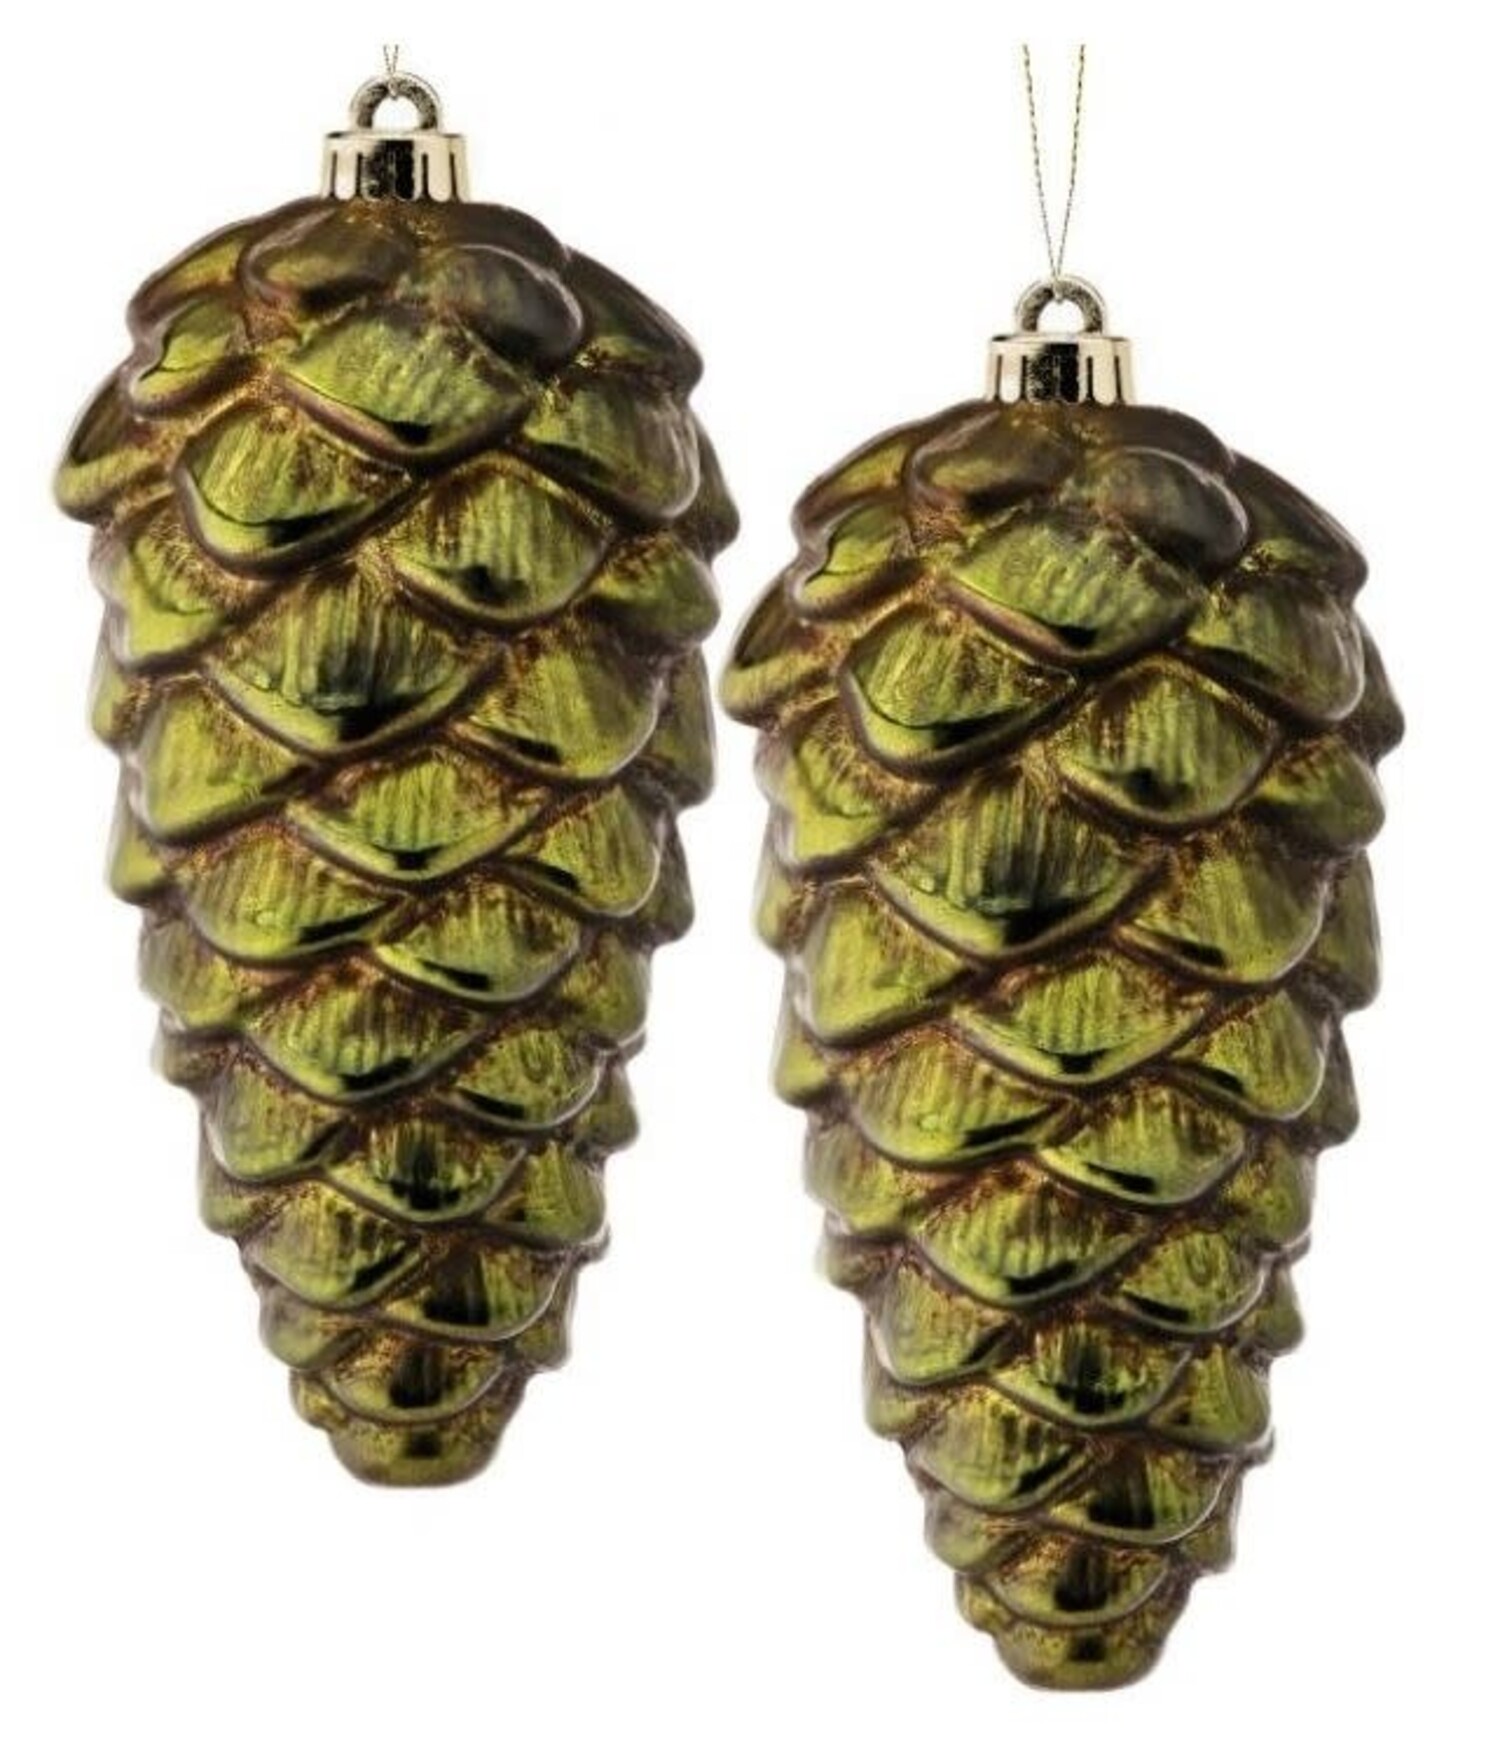 Gold-Brushed Pine Cone Ornaments with #myfavoritebloggers - the